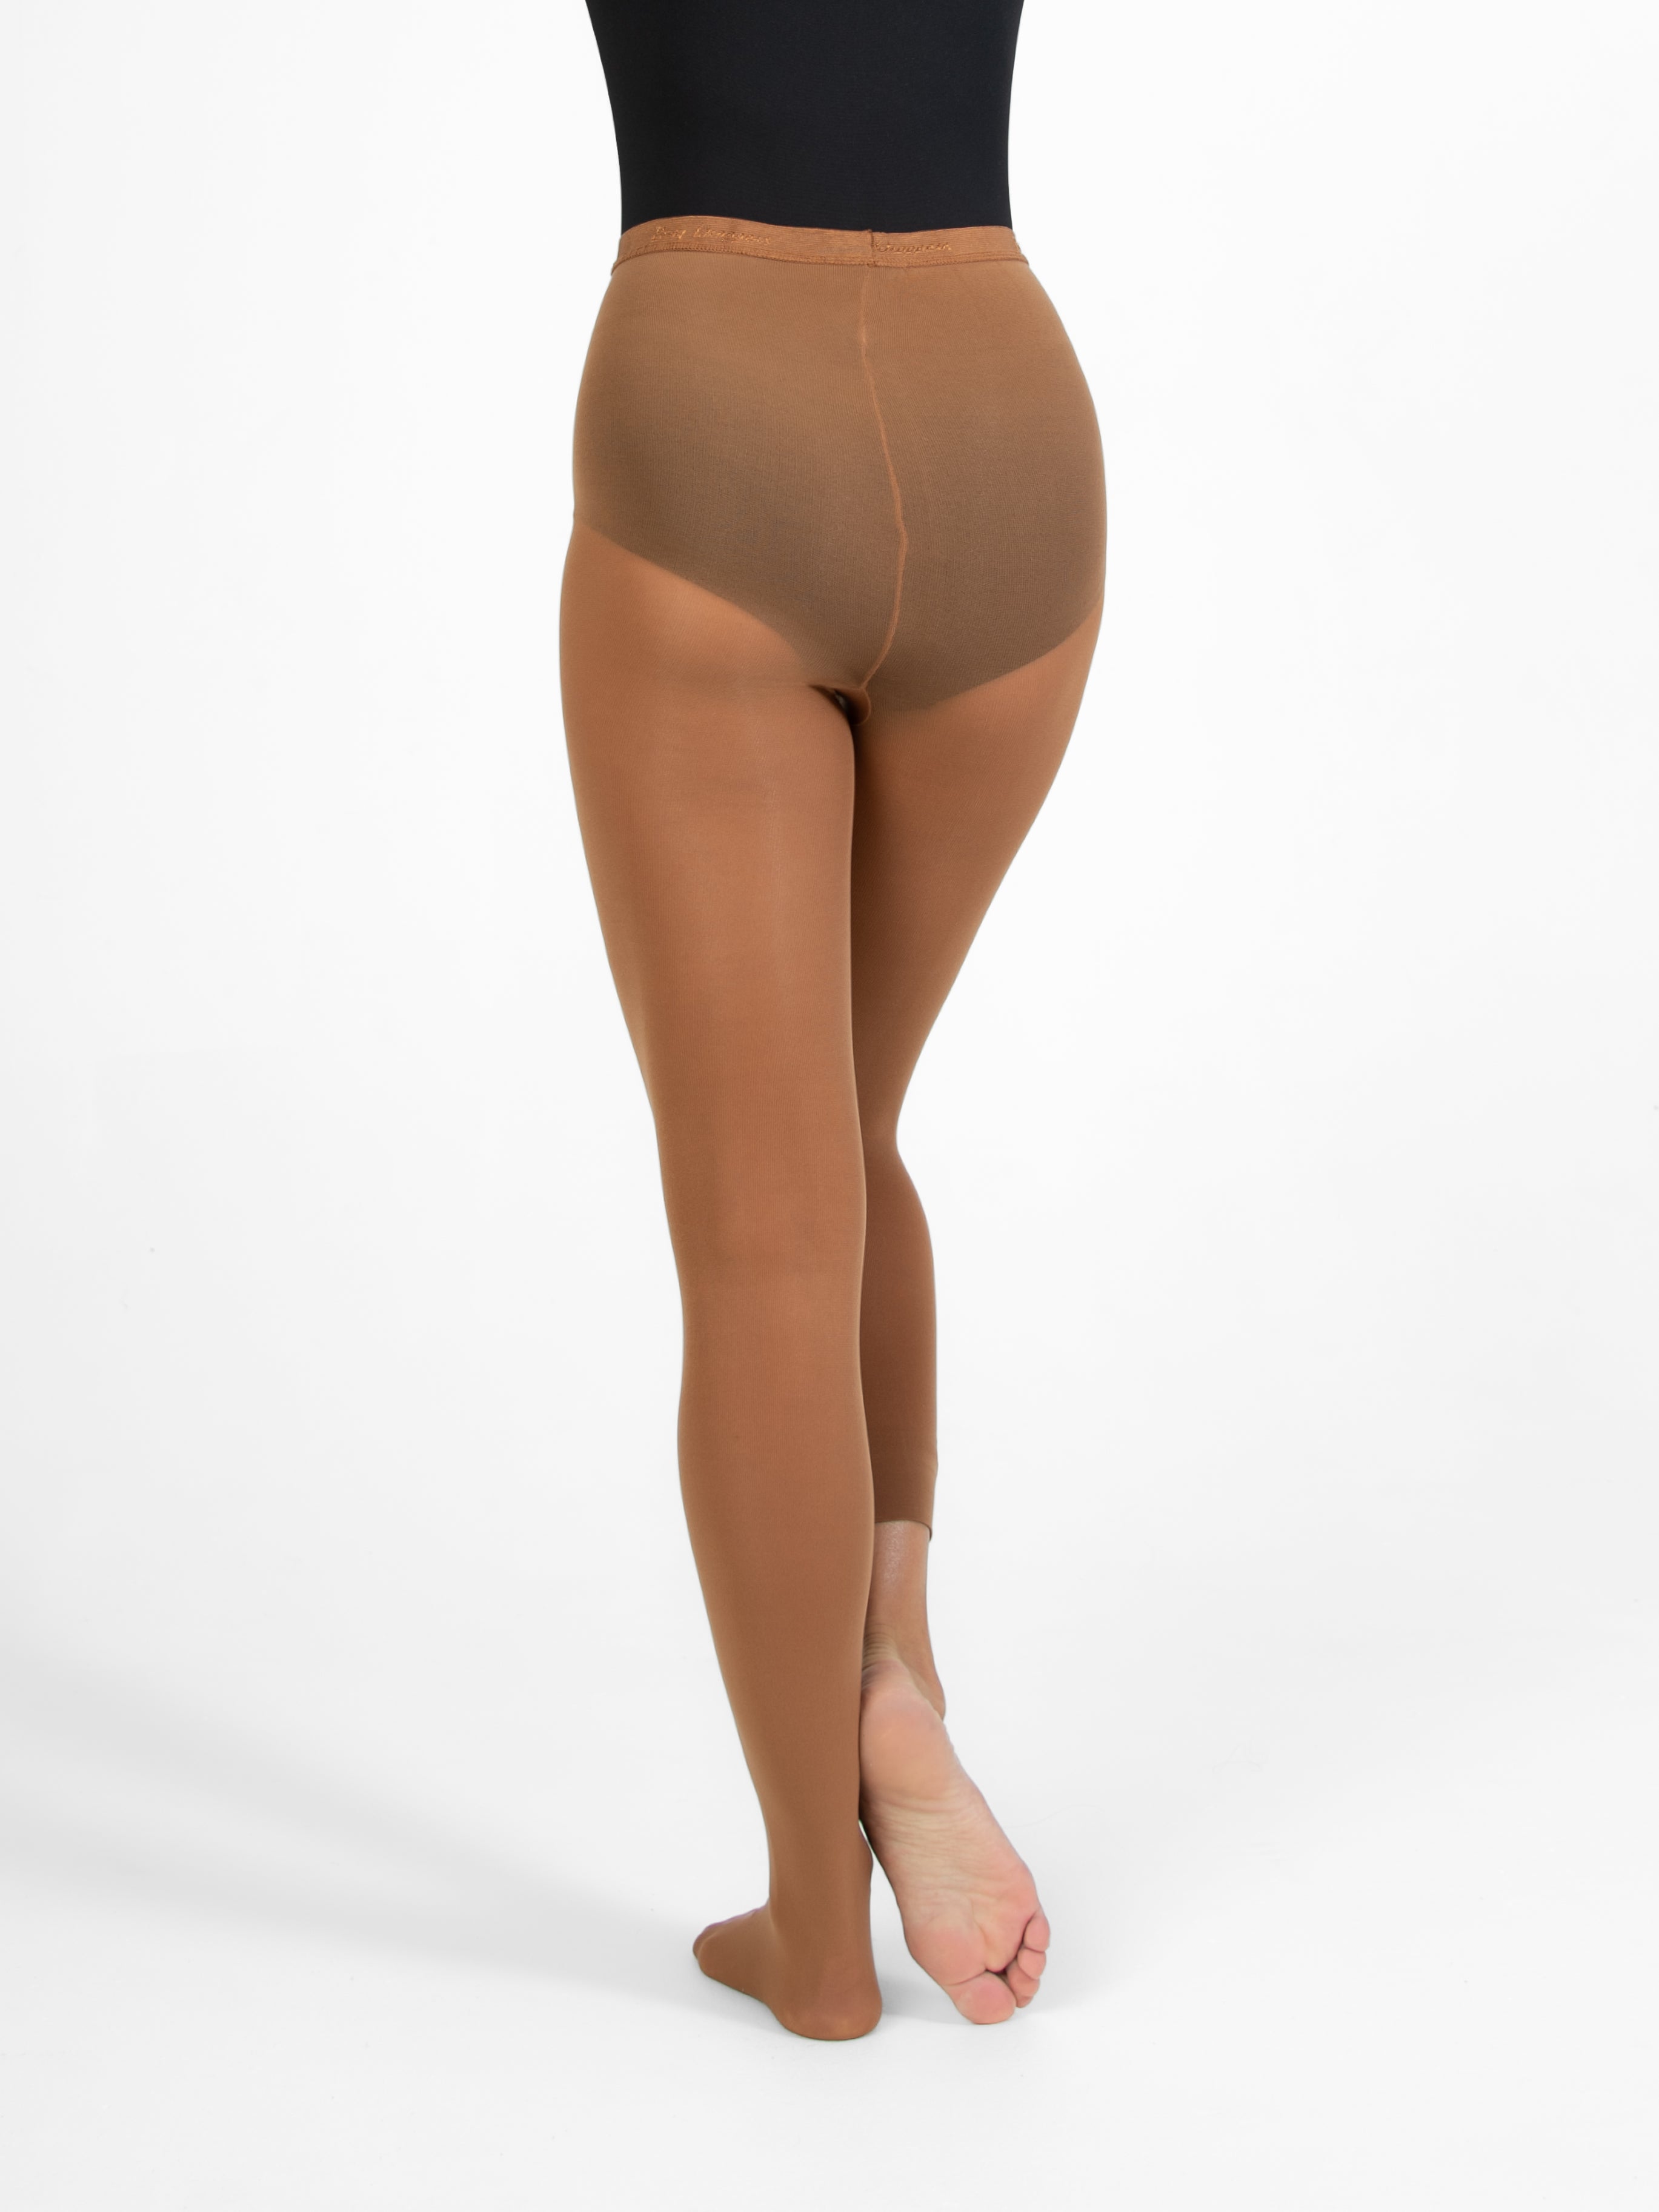  Body Wrappers Womens Convertible Tights No Back Seam Style A81,  Ballet Pink, Small/Medium : Clothing, Shoes & Jewelry